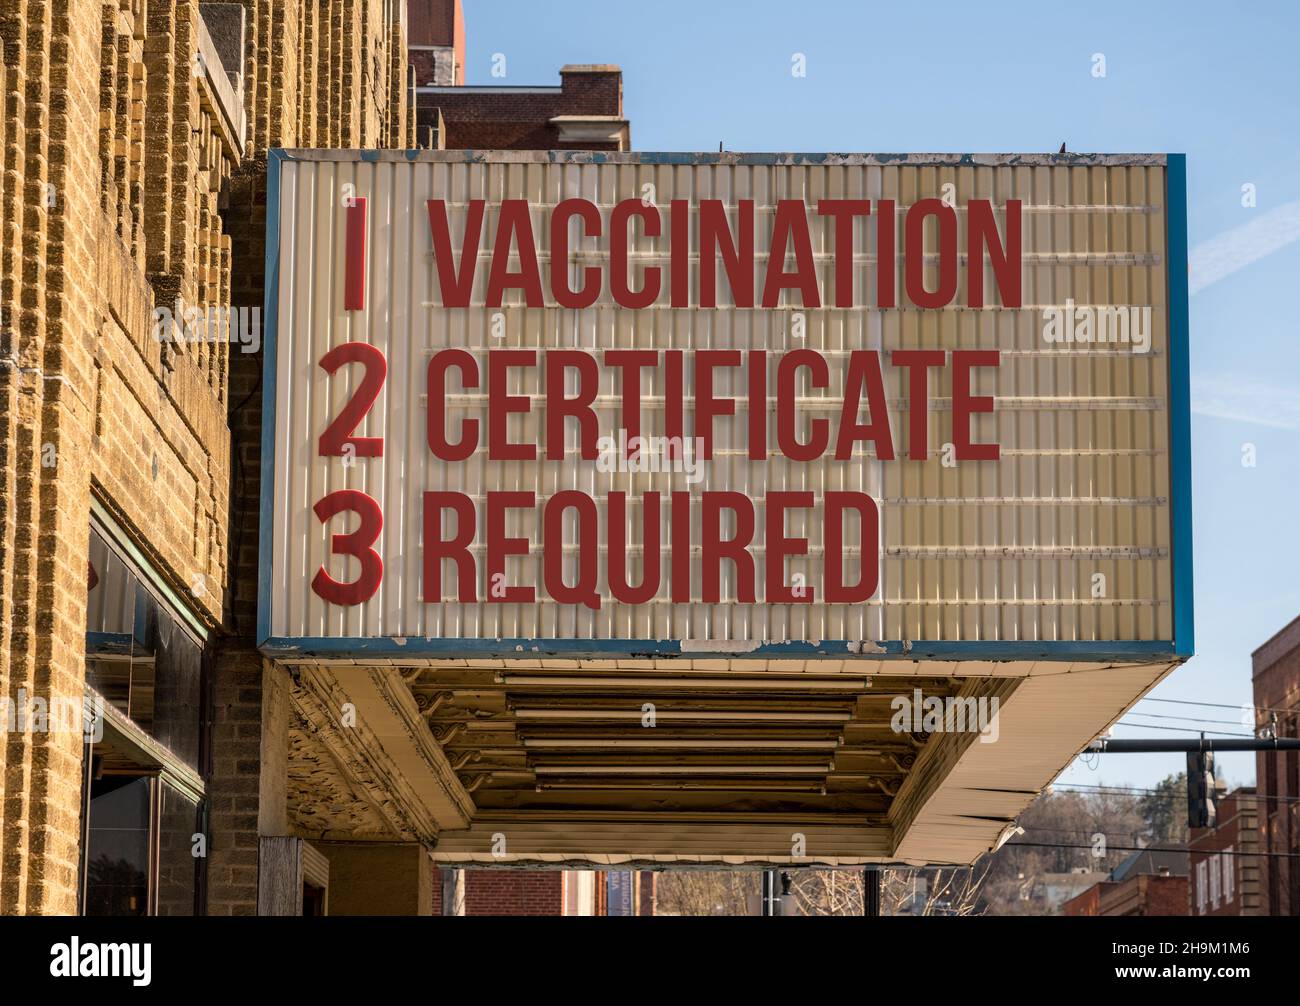 Mockup of movie cinema billboard with vaccination mandate for entry into public areas during coronavirus or Covid-19 epidemic Stock Photo